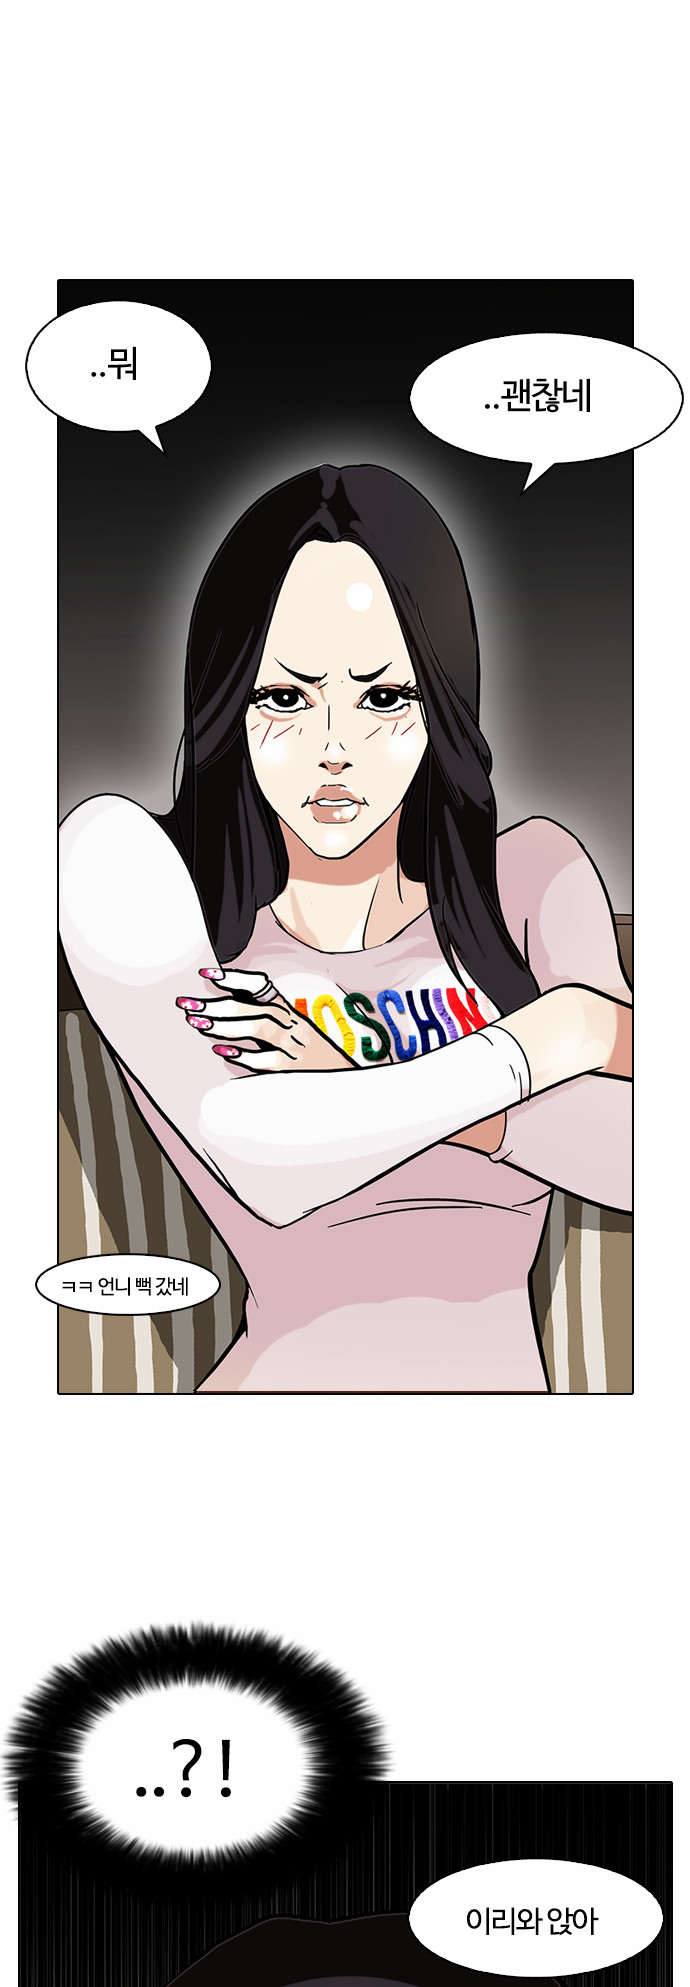 Lookism - Chapter 76 - Page 3